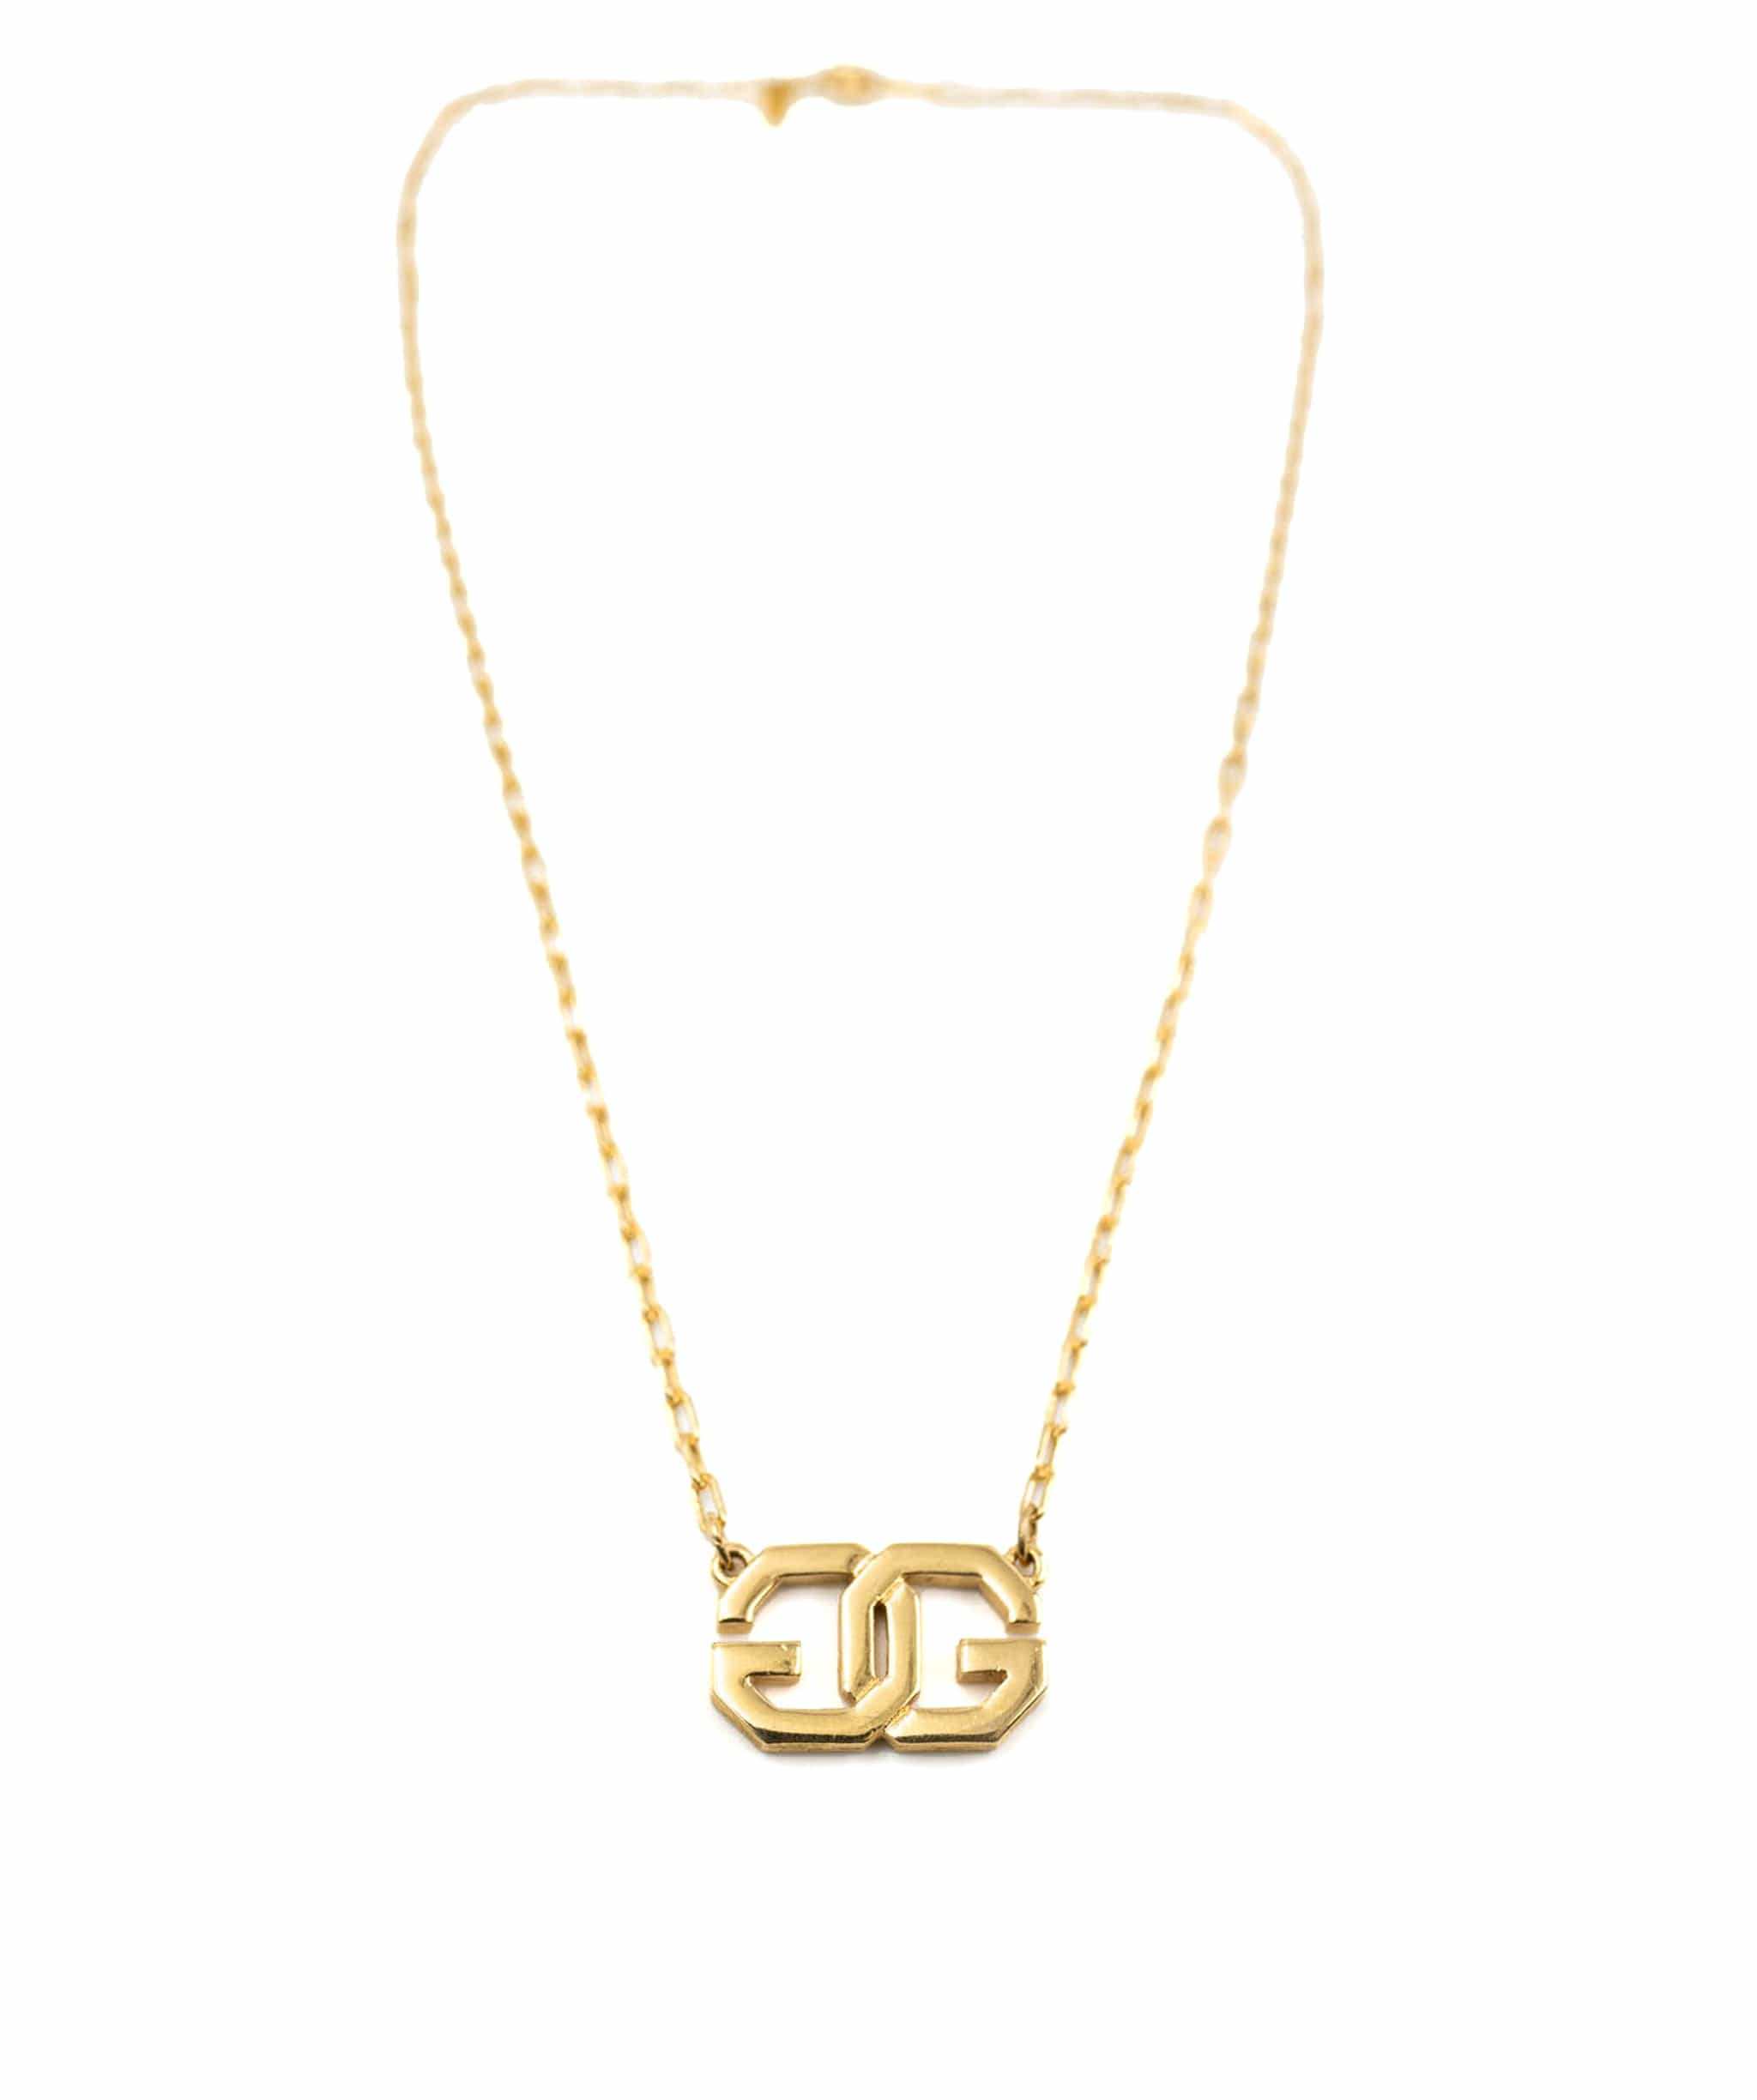 Givenchy Givenchy Logo Chain Necklace ASL3561